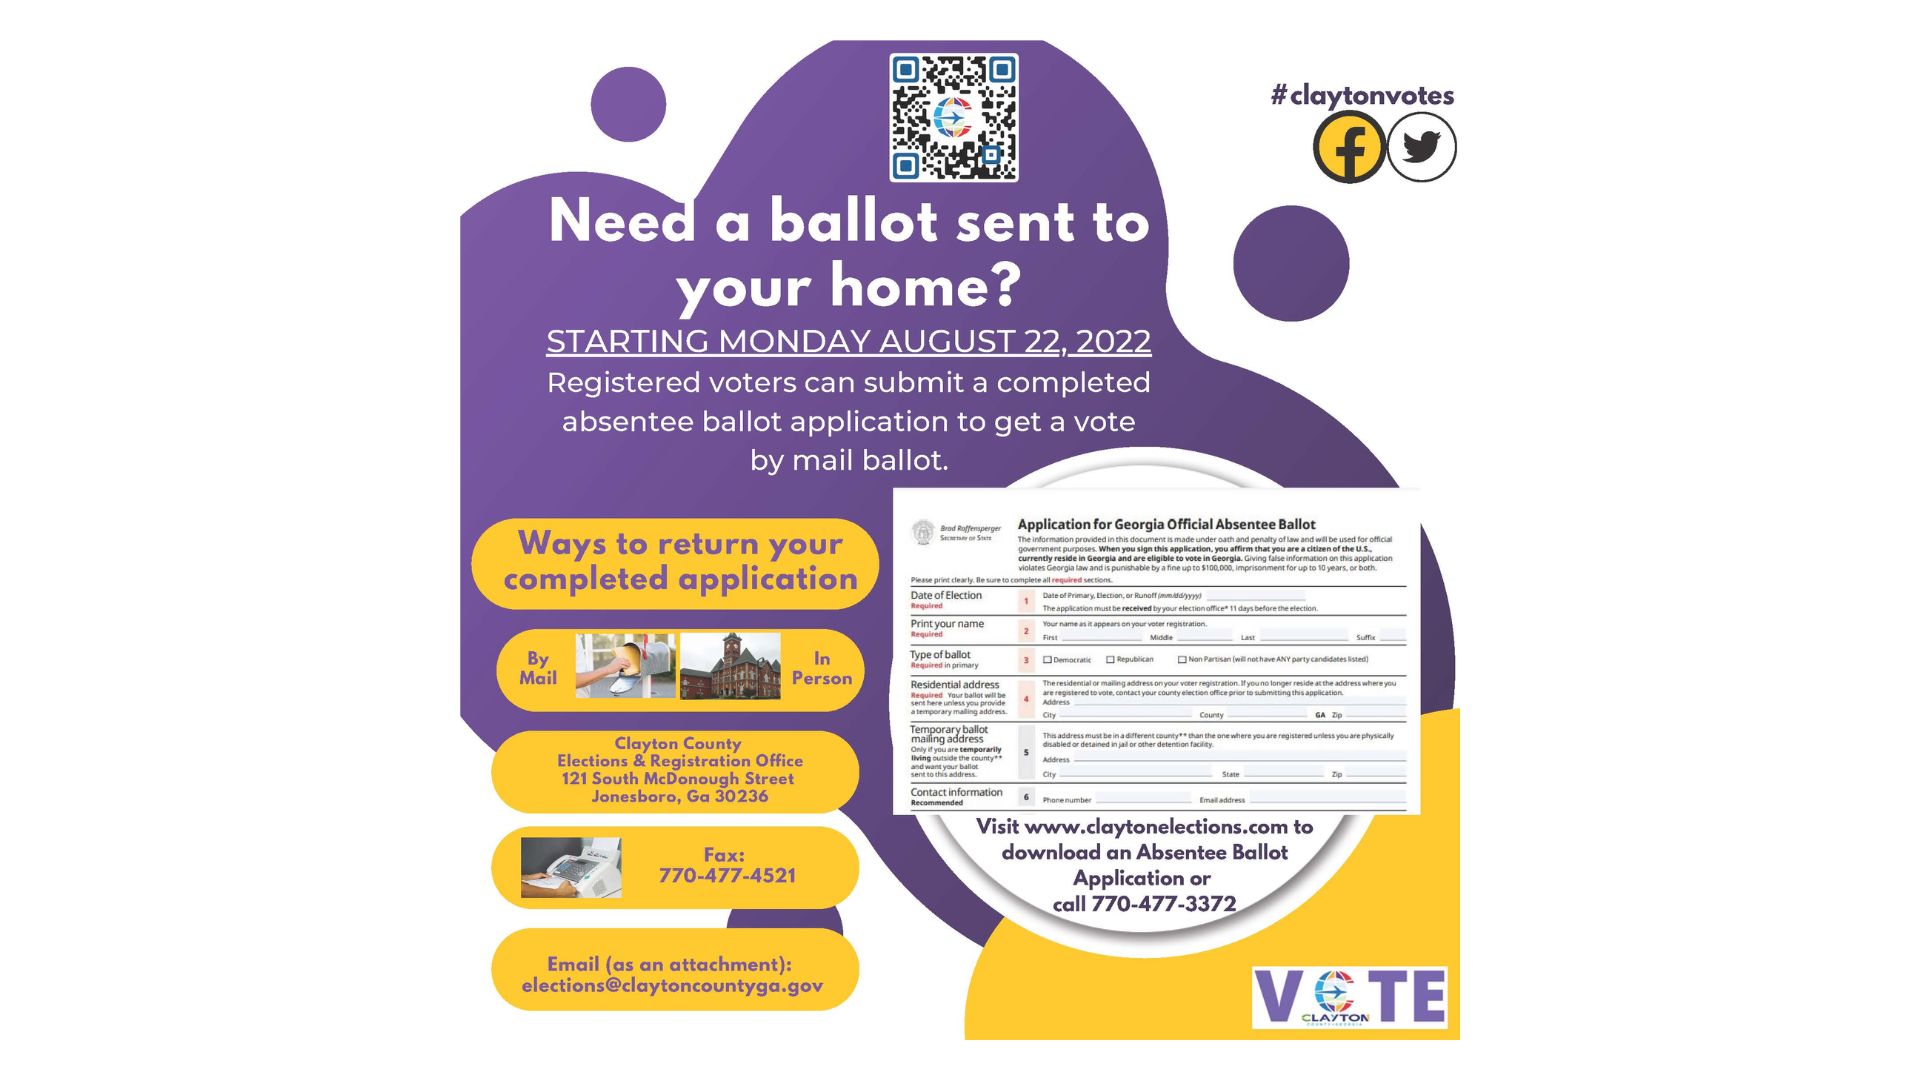 How to apply for an absentee ballot for november 2022 in Clayton County